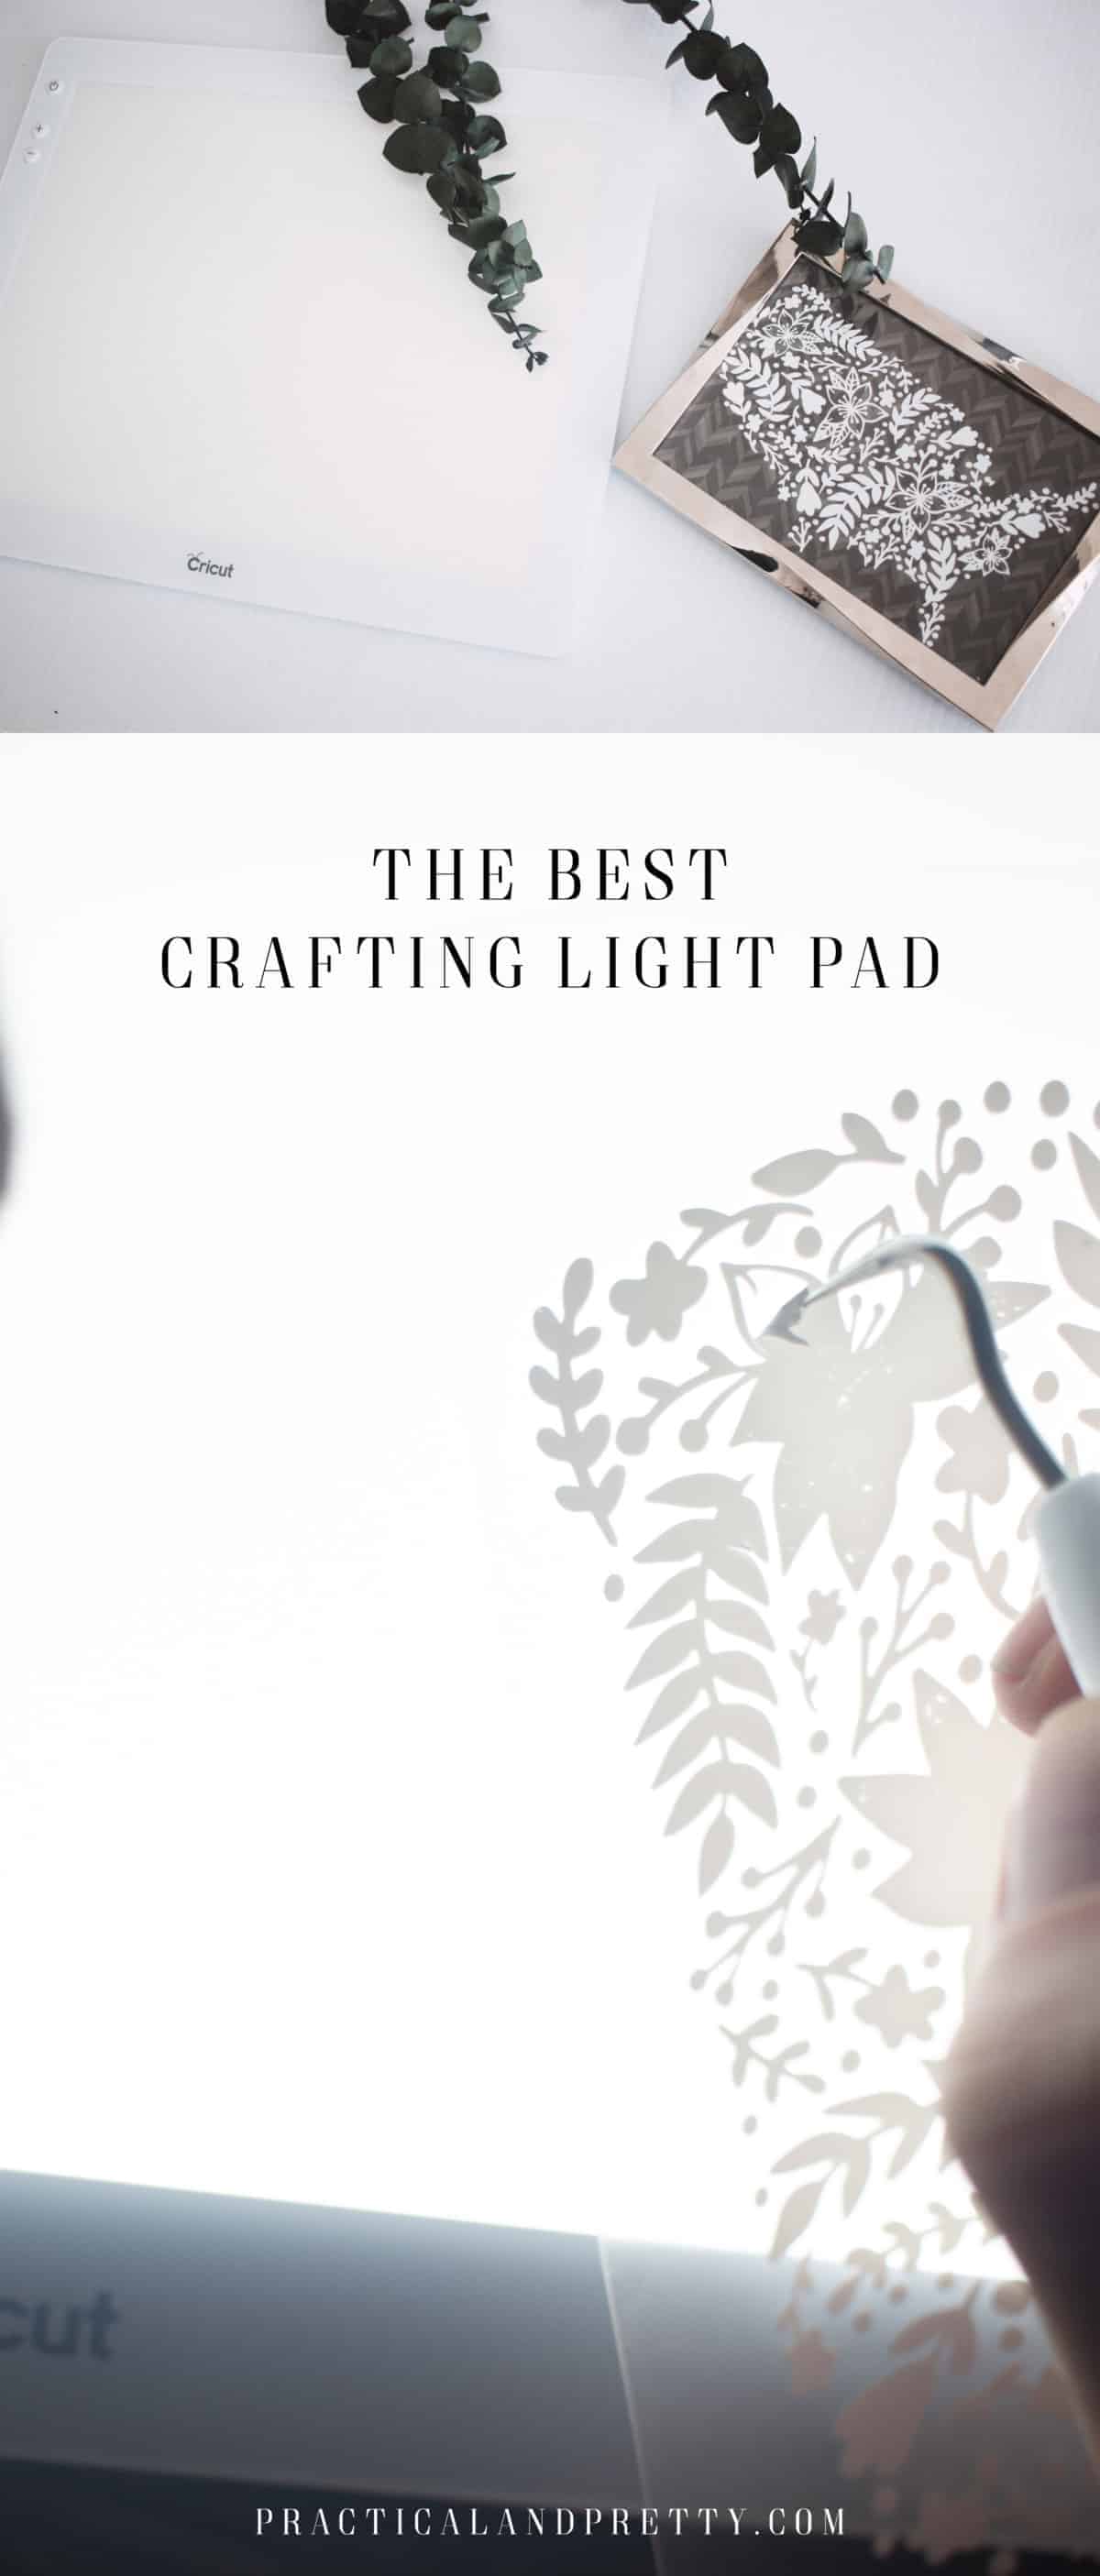 See how I use Cricut's BrightPad to make my crafting life a little brighter. See why this is the best crafting light pad on the market. 